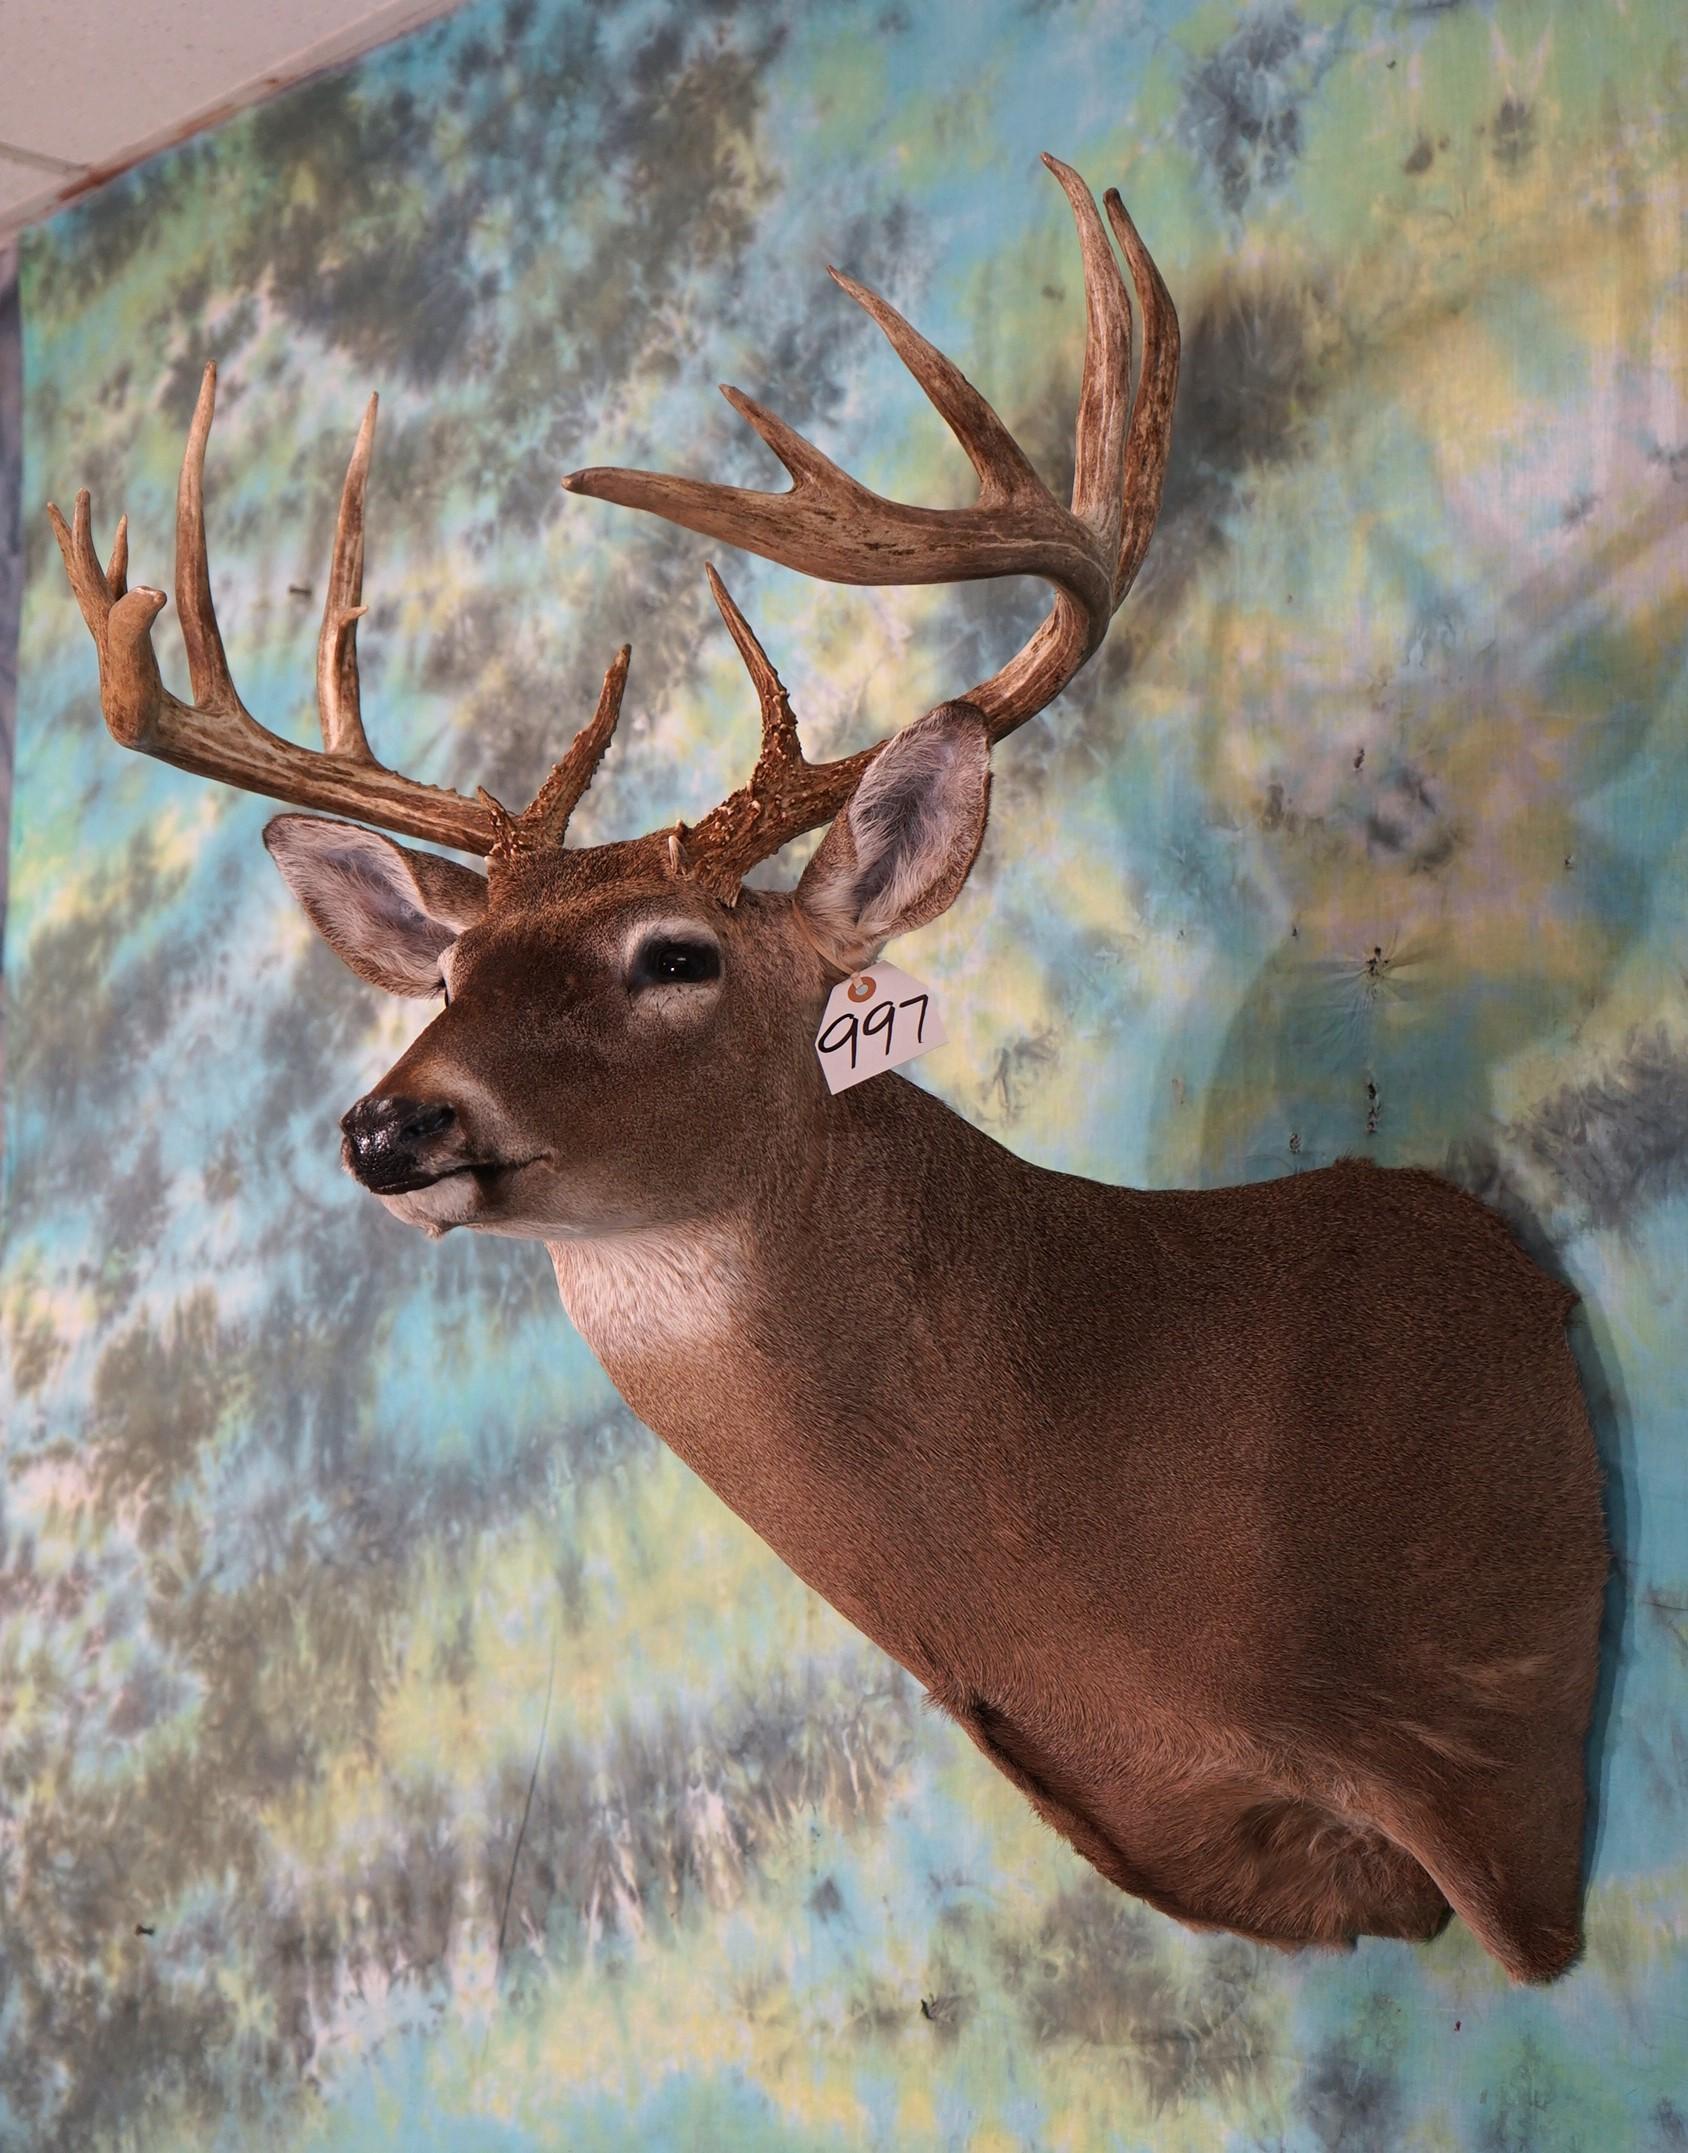 17pt. South Texas Whitetail Deer Shoulder Taxidermy Mount